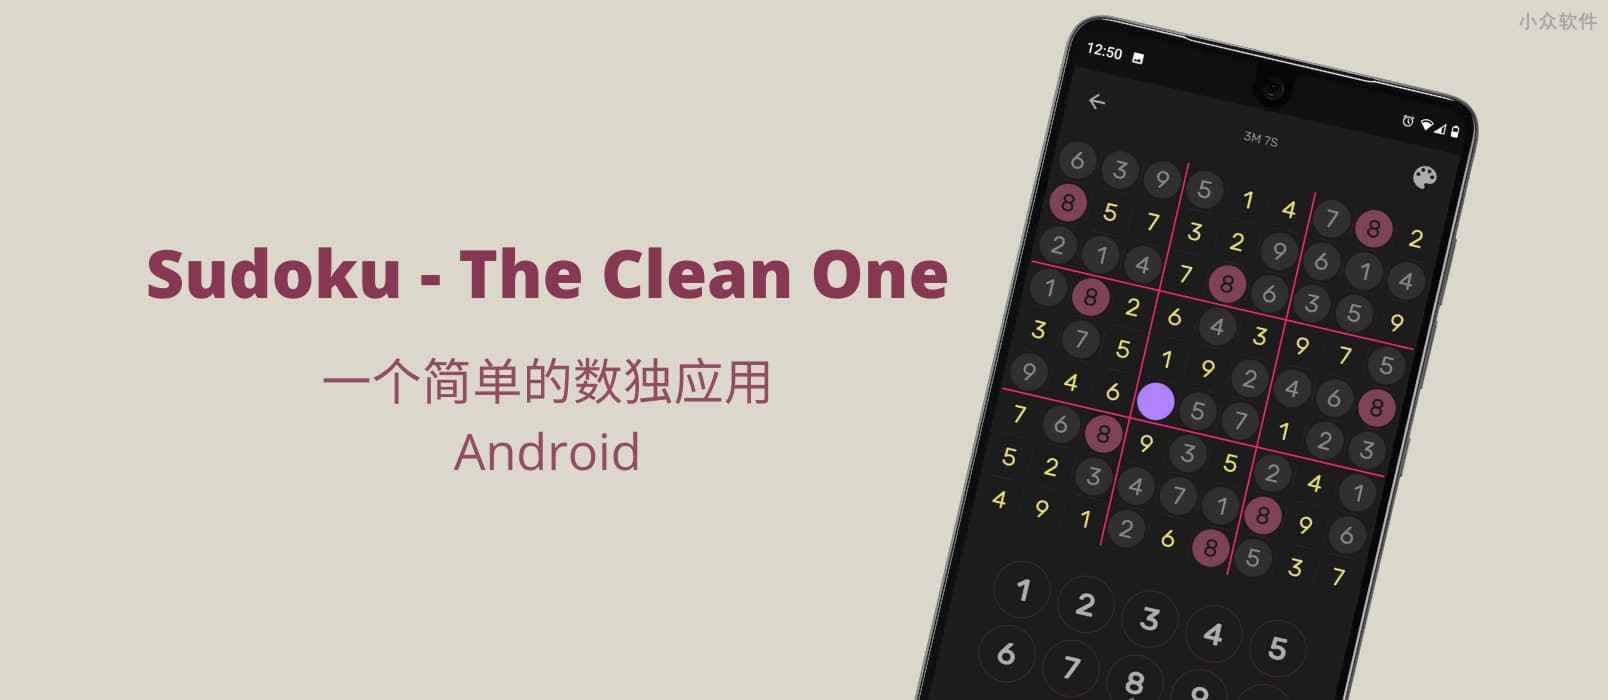 Sudoku - The Clean One：一个简单的数独游戏[Android] 1